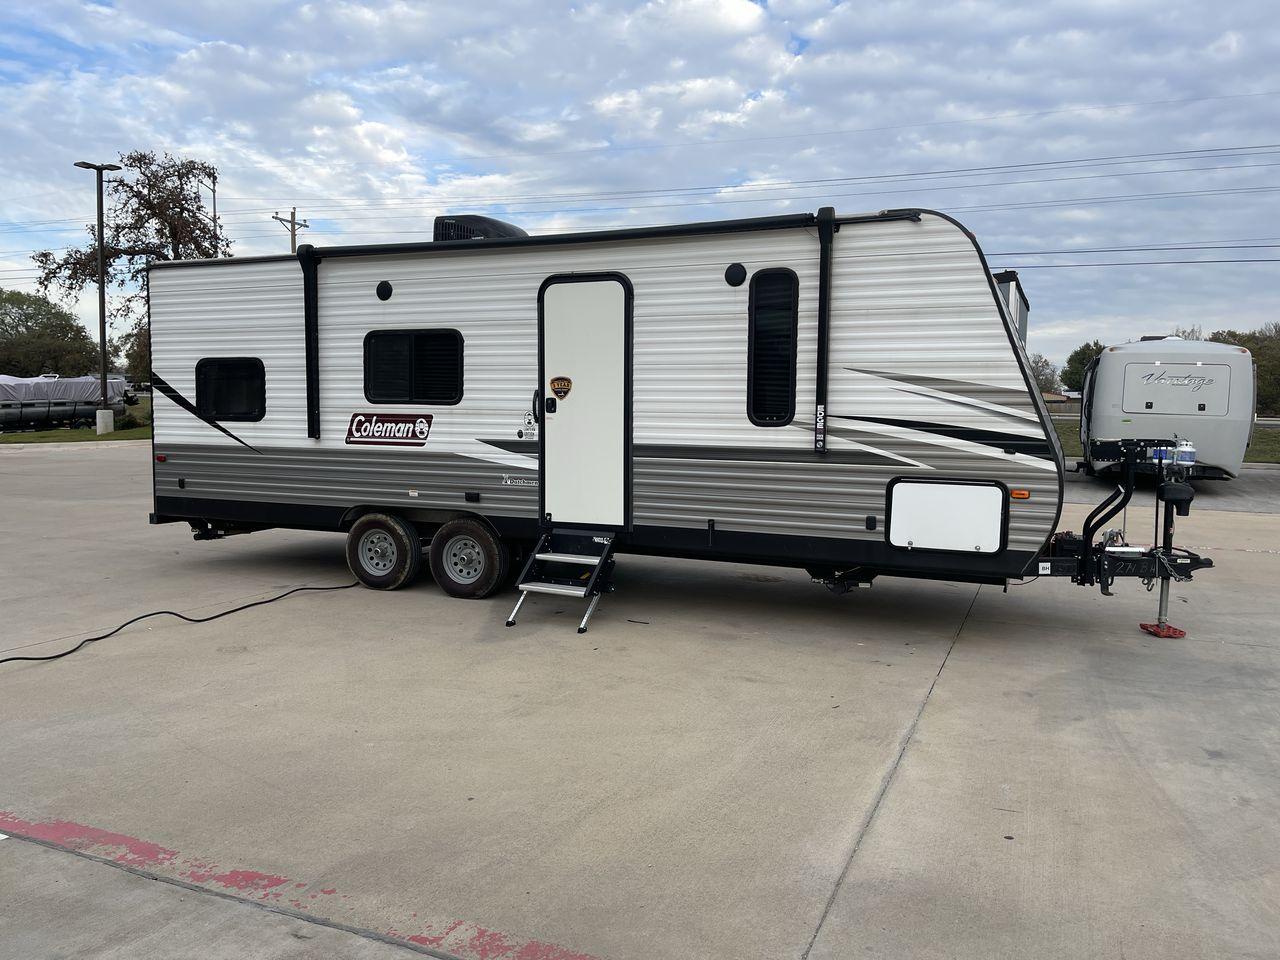 2021 WHITE KEYSTONE COLEMAN 274BH (4YDT27429MH) , Length: 28.58 ft. | Dry Weight: 4,789 lbs. | Slides: 0 transmission, located at 4319 N Main St, Cleburne, TX, 76033, (817) 678-5133, 32.385960, -97.391212 - Set out on an adventure-filled, comfortable journey in the 2021 Keystone Coleman 274BH travel trailer. Families looking for a fun and memorable camping trip will love this well-designed and adaptable travel companion. The dimensions of this unit are 28.58 ft in length, 8 ft in width, and 10.33 ft - Photo #22